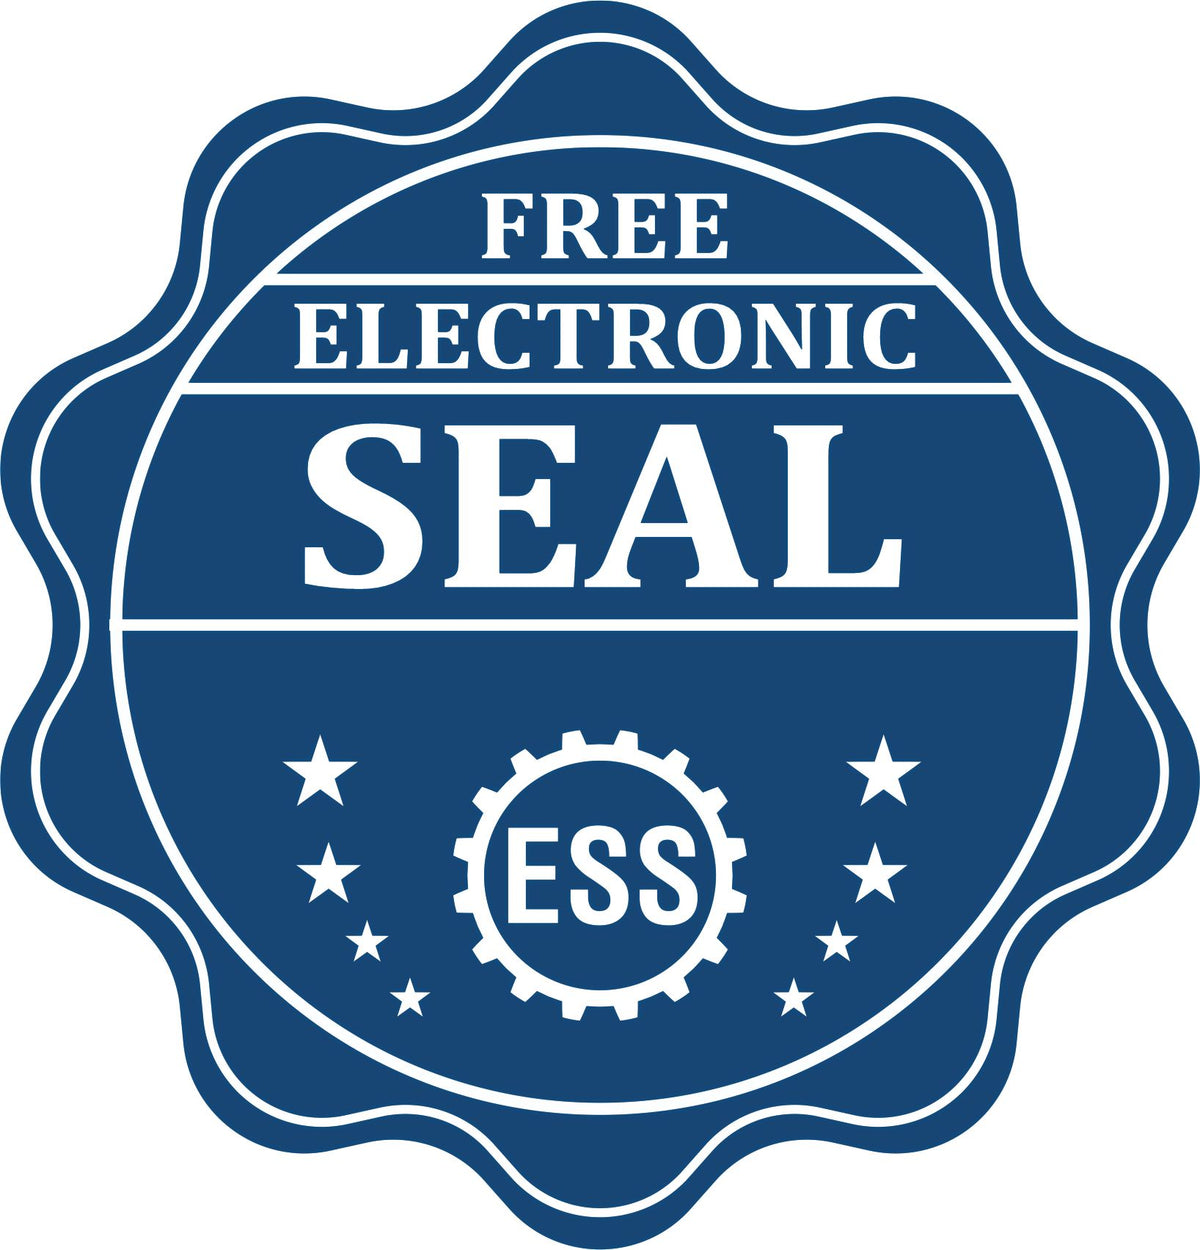 A badge showing a free electronic seal for the Slim Pre-Inked Ohio Land Surveyor Seal Stamp with stars and the ESS gear on the emblem.